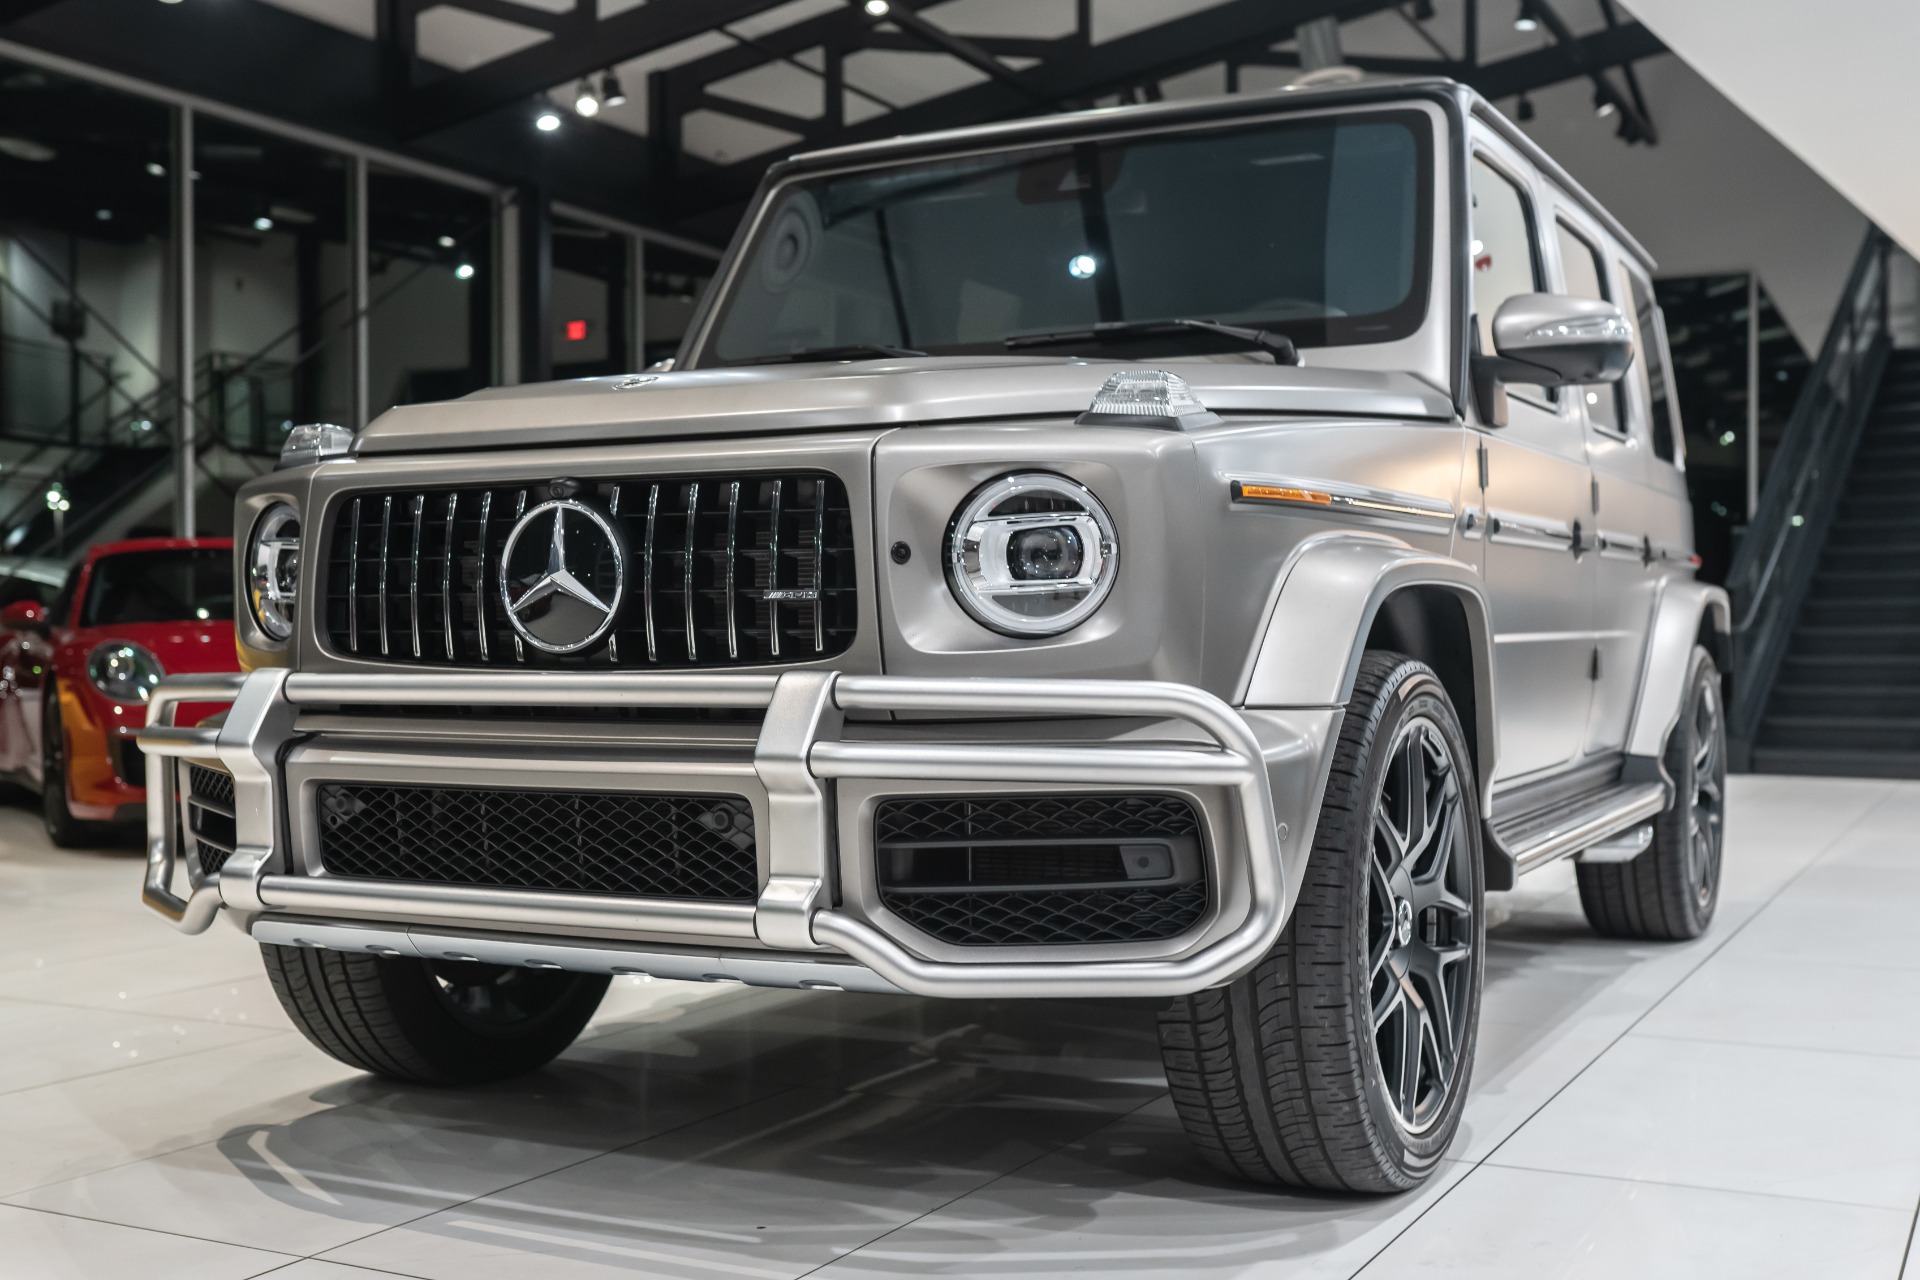 Used-2021-Mercedes-Benz-G63-AMG-4WD-SUV-Manufaktur-Magno-Paint-Exclusive-Interior-22inch-Wheels-PPF